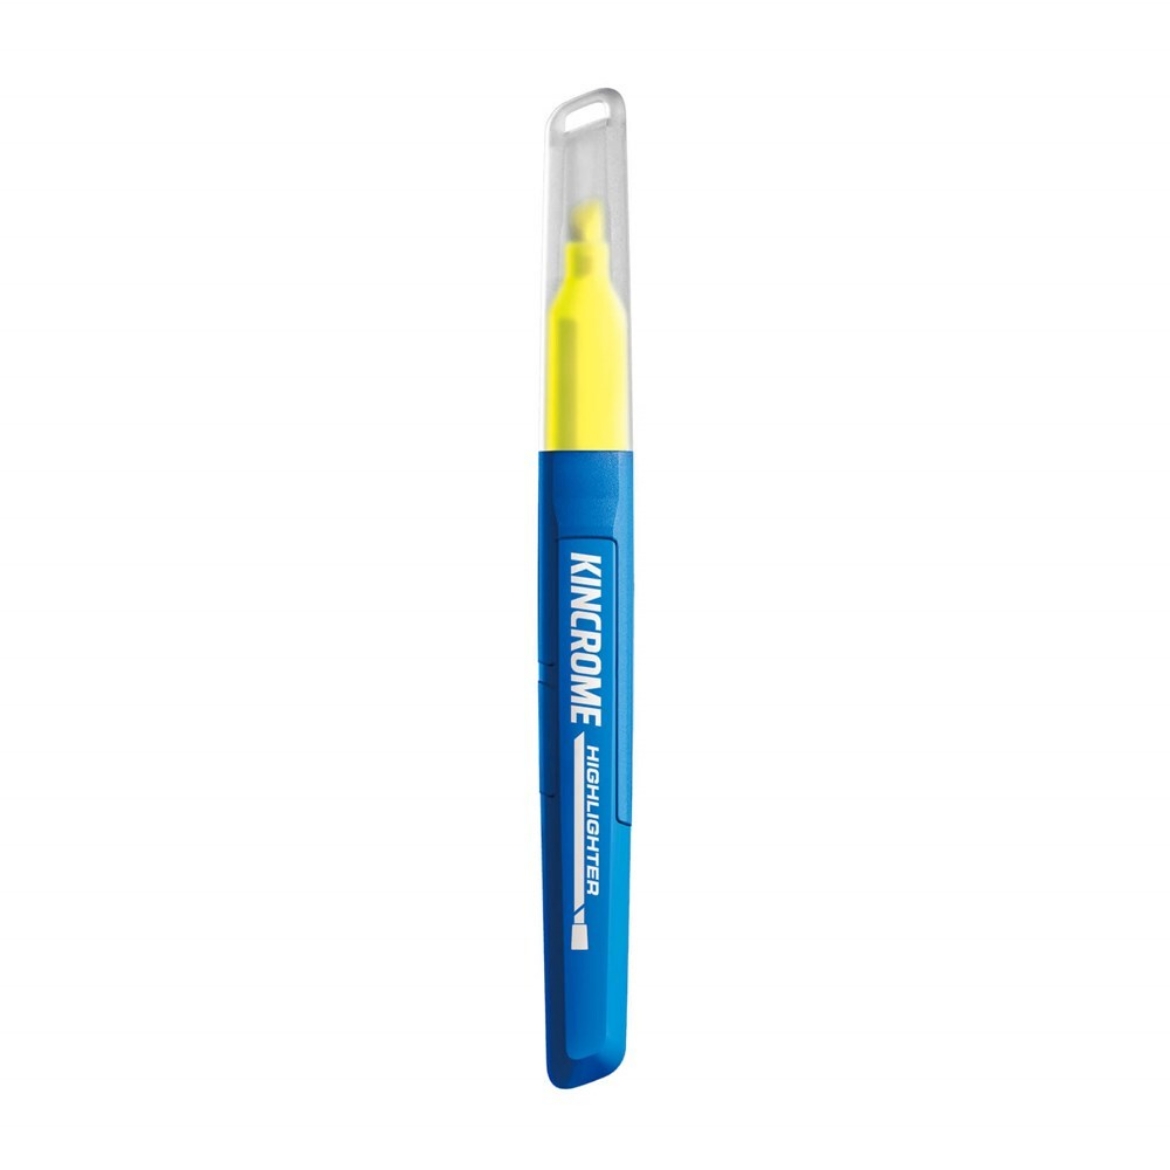 Picture of KINCROME HIGHLIGHTER CHISEL TIP MARKER - YELLOW